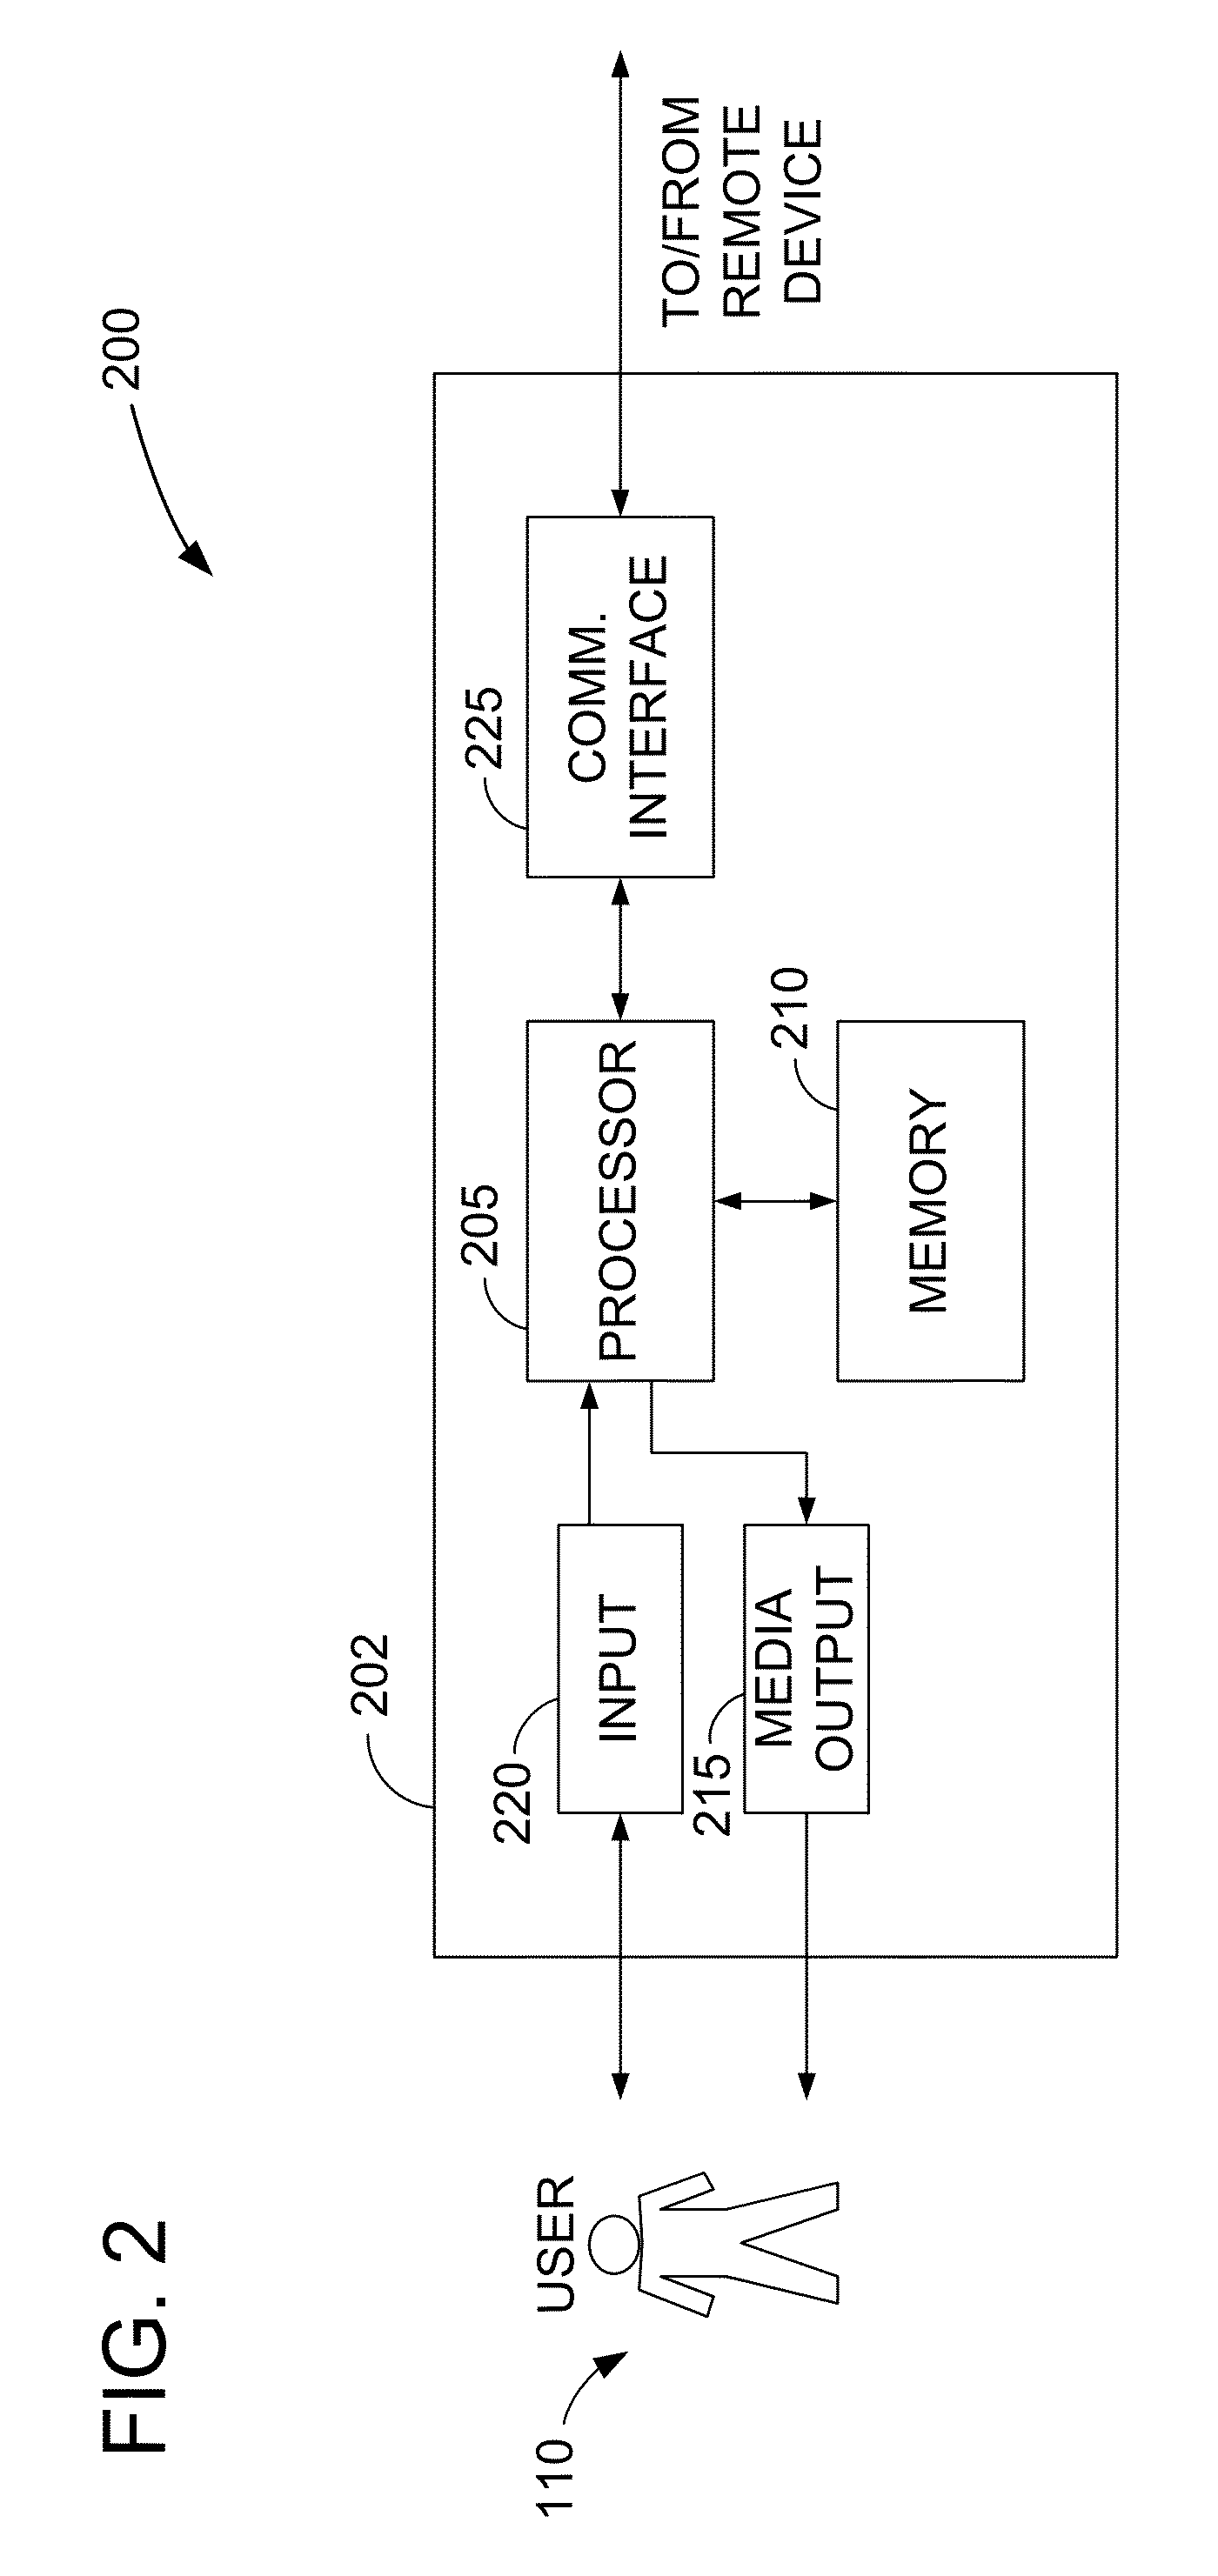 Methods and systems for managing agricultural activities